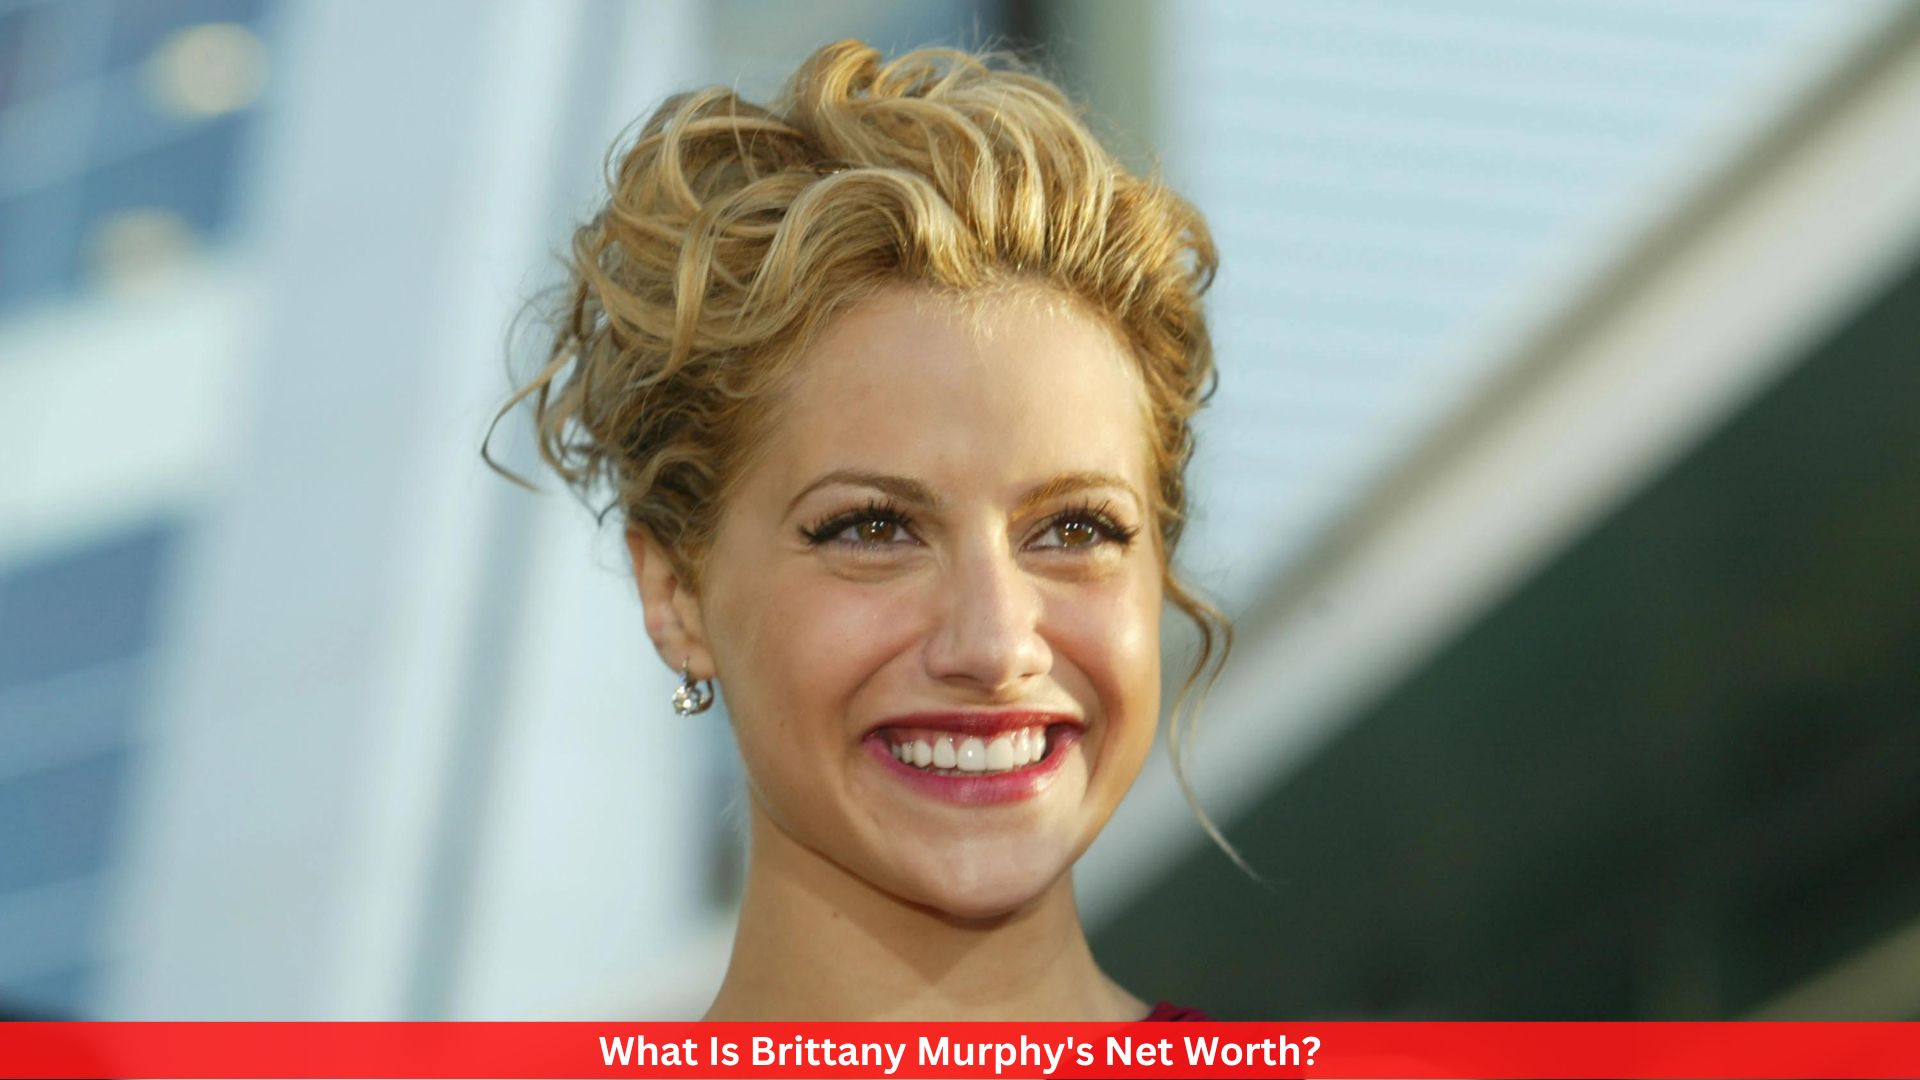 What Is Brittany Murphy's Net Worth?